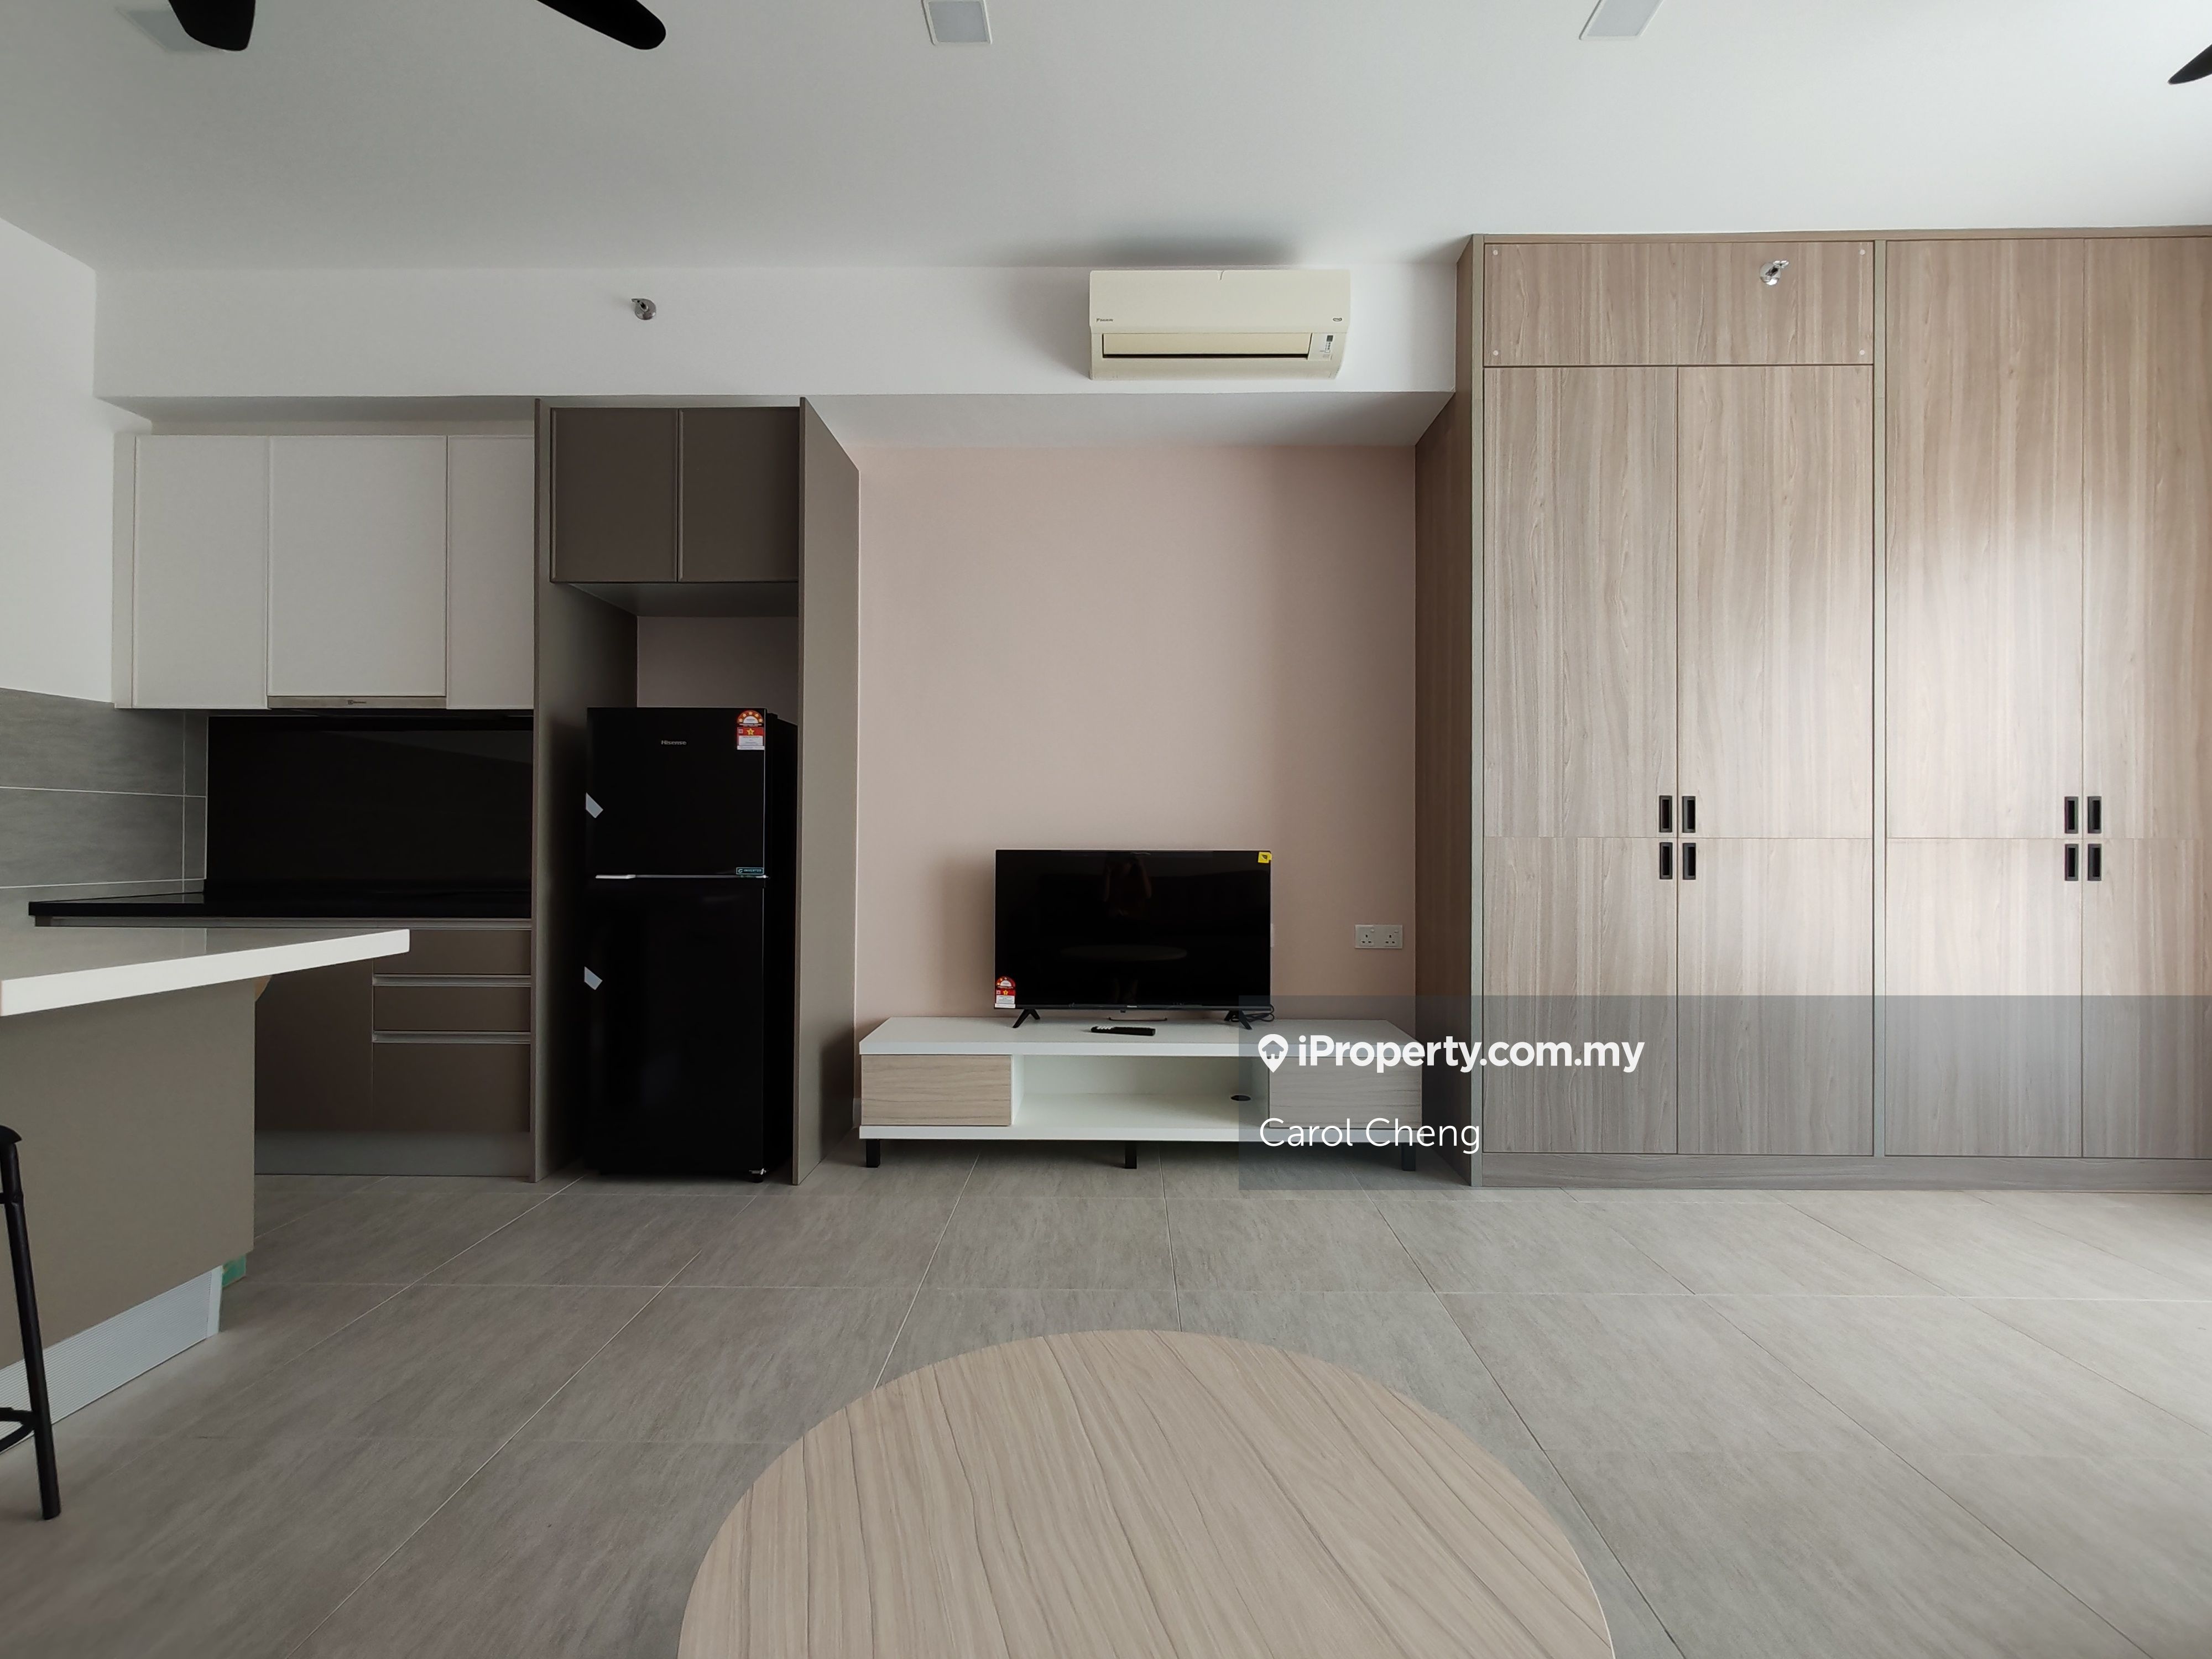 Bell Suites, Sunsuria City, Sepang Soho 1 bedroom for rent | iProperty ...